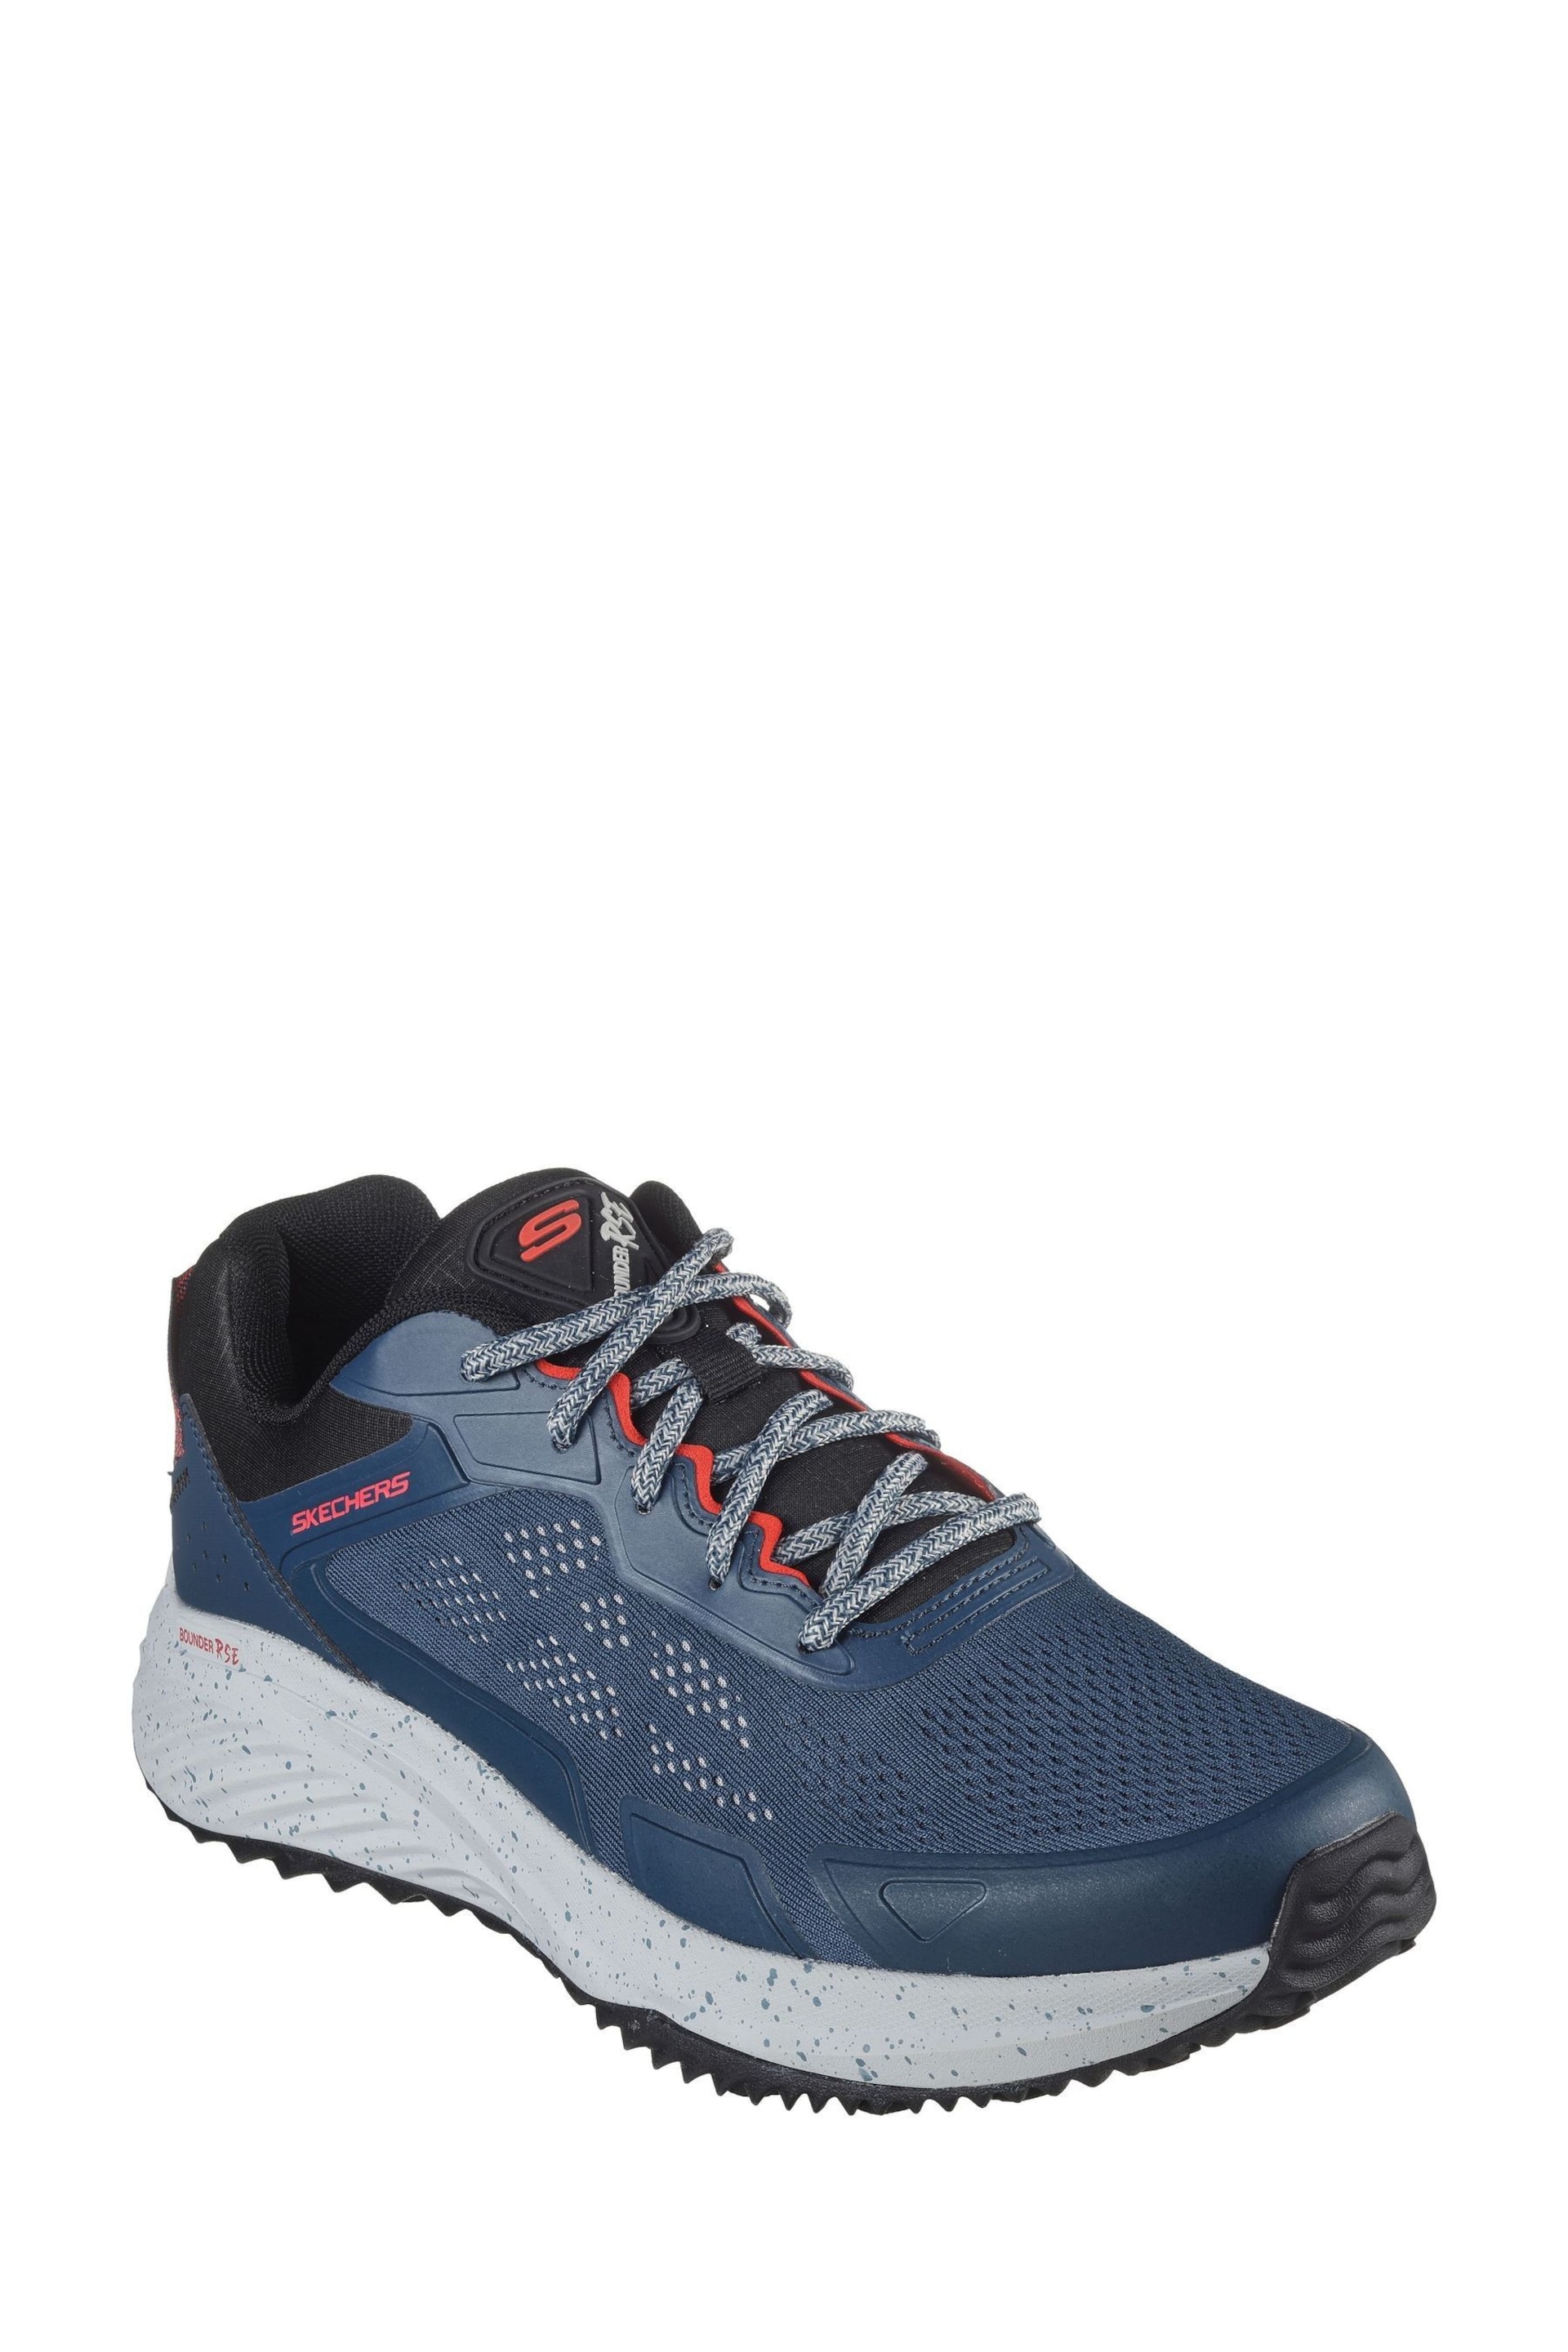 Skechers Blue Bounder Trainers - Image 2 of 4